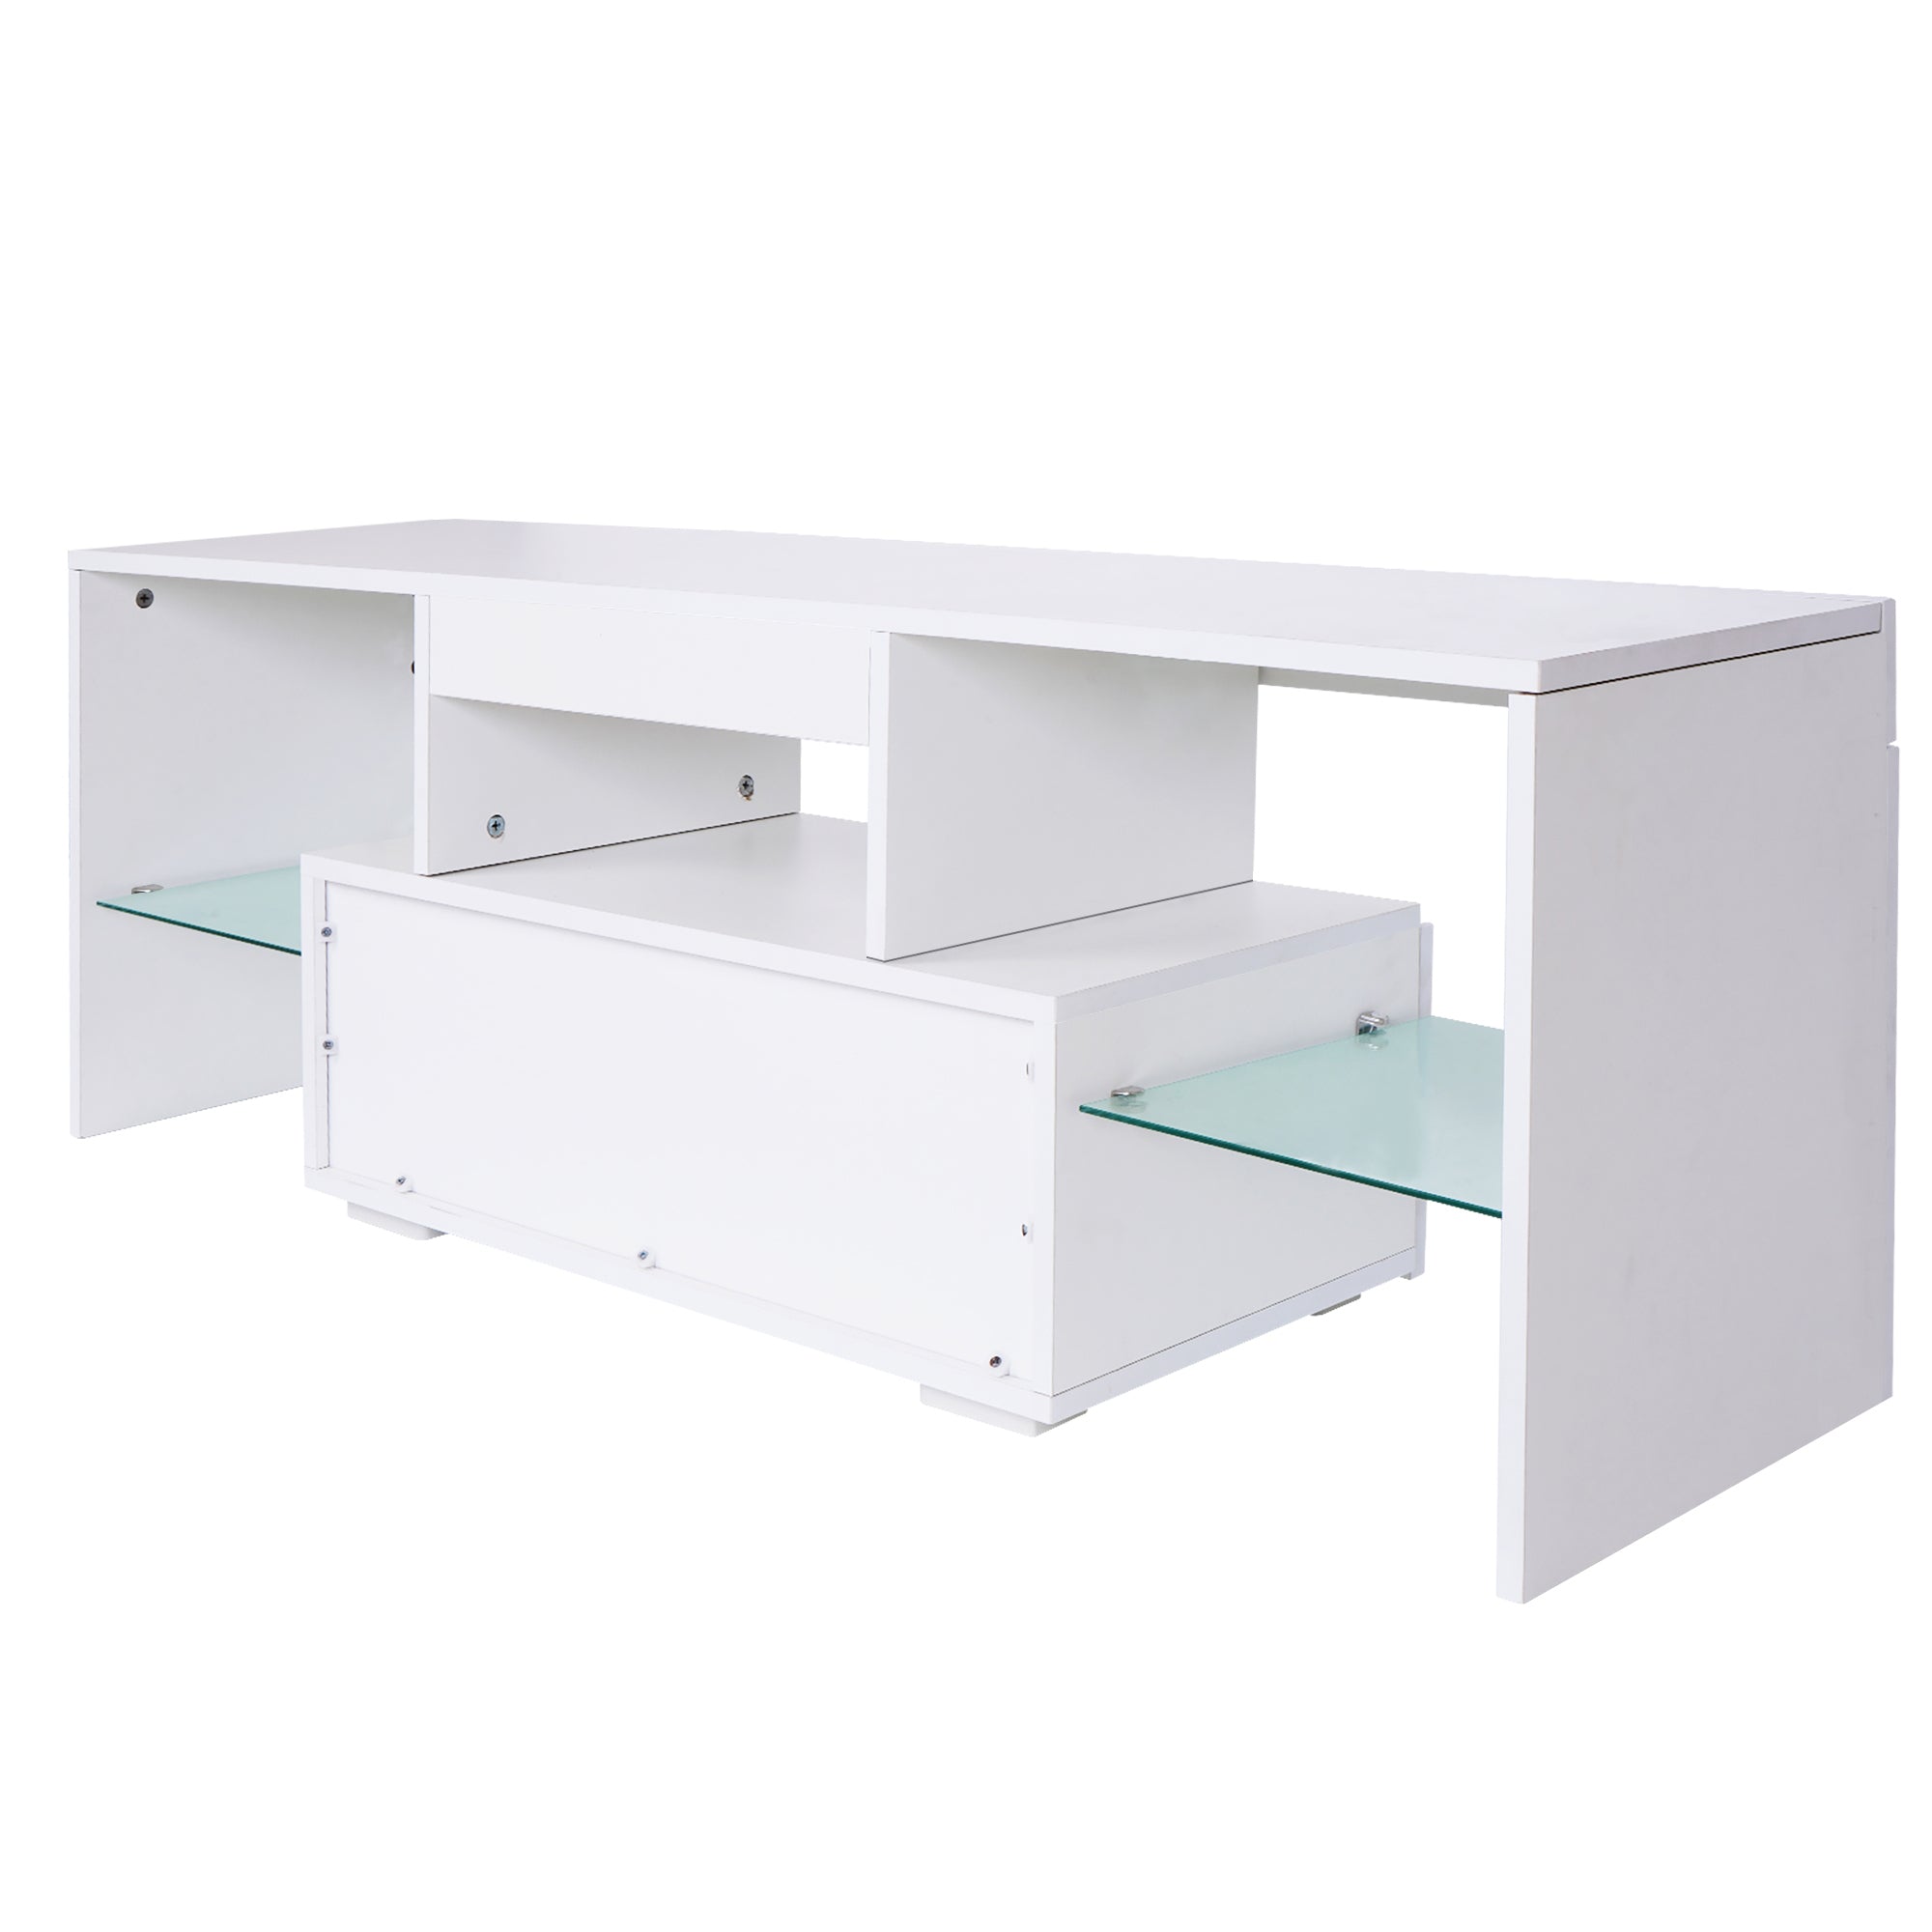 TV stand with Storage 43 inch LED Modern TV Media white-particle board